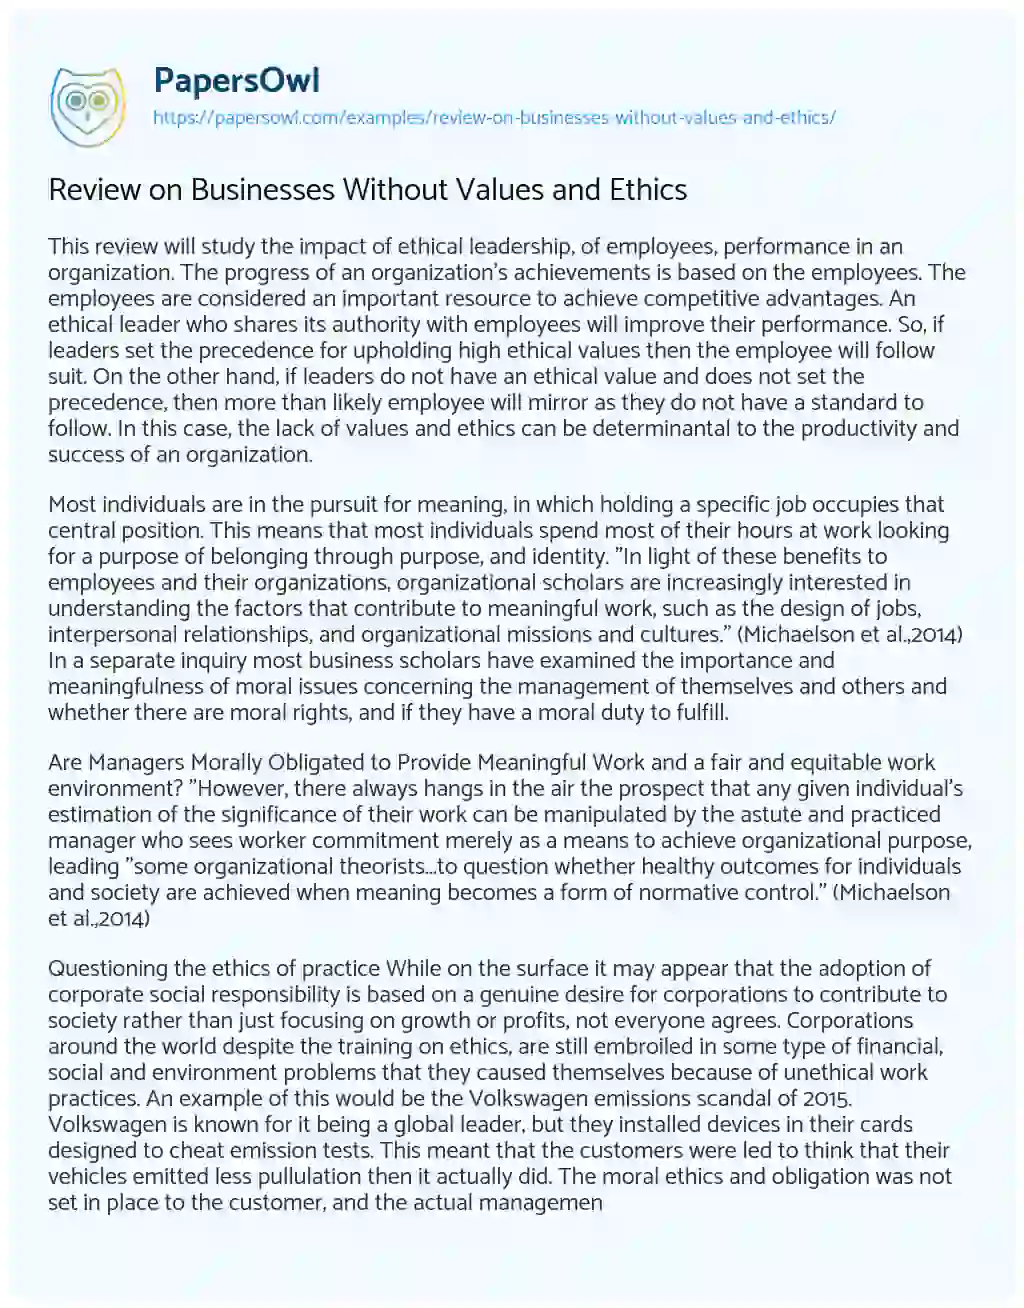 Review on Businesses Without Values and Ethics essay